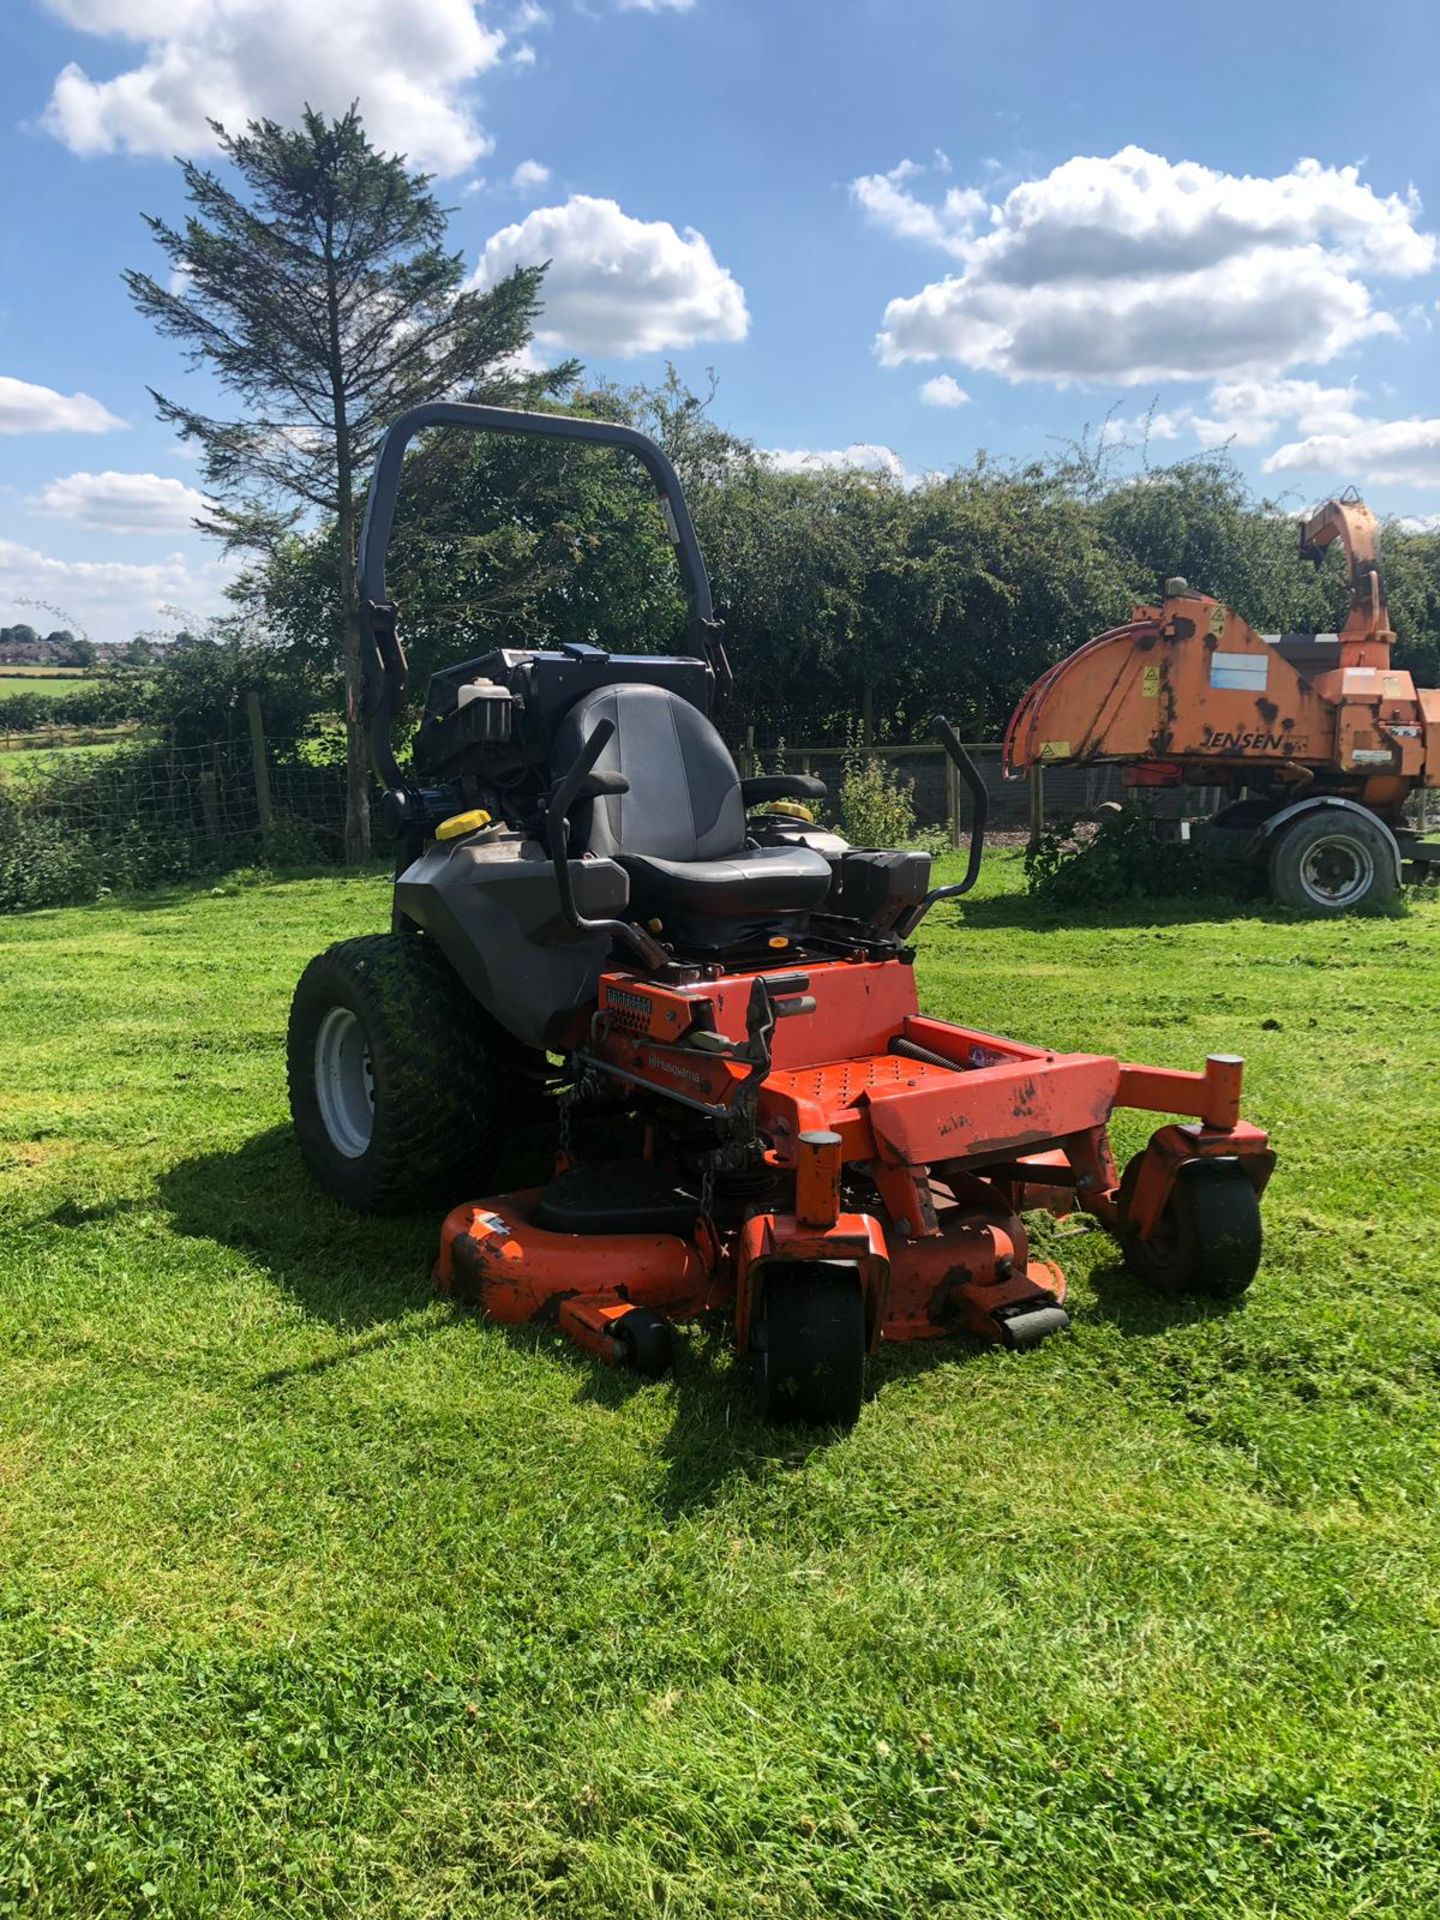 HUSQVARNA ZERO TURN RIDE ON LAWN MOWR, RUNS, WORKS AND CUTS, ONLY 900 HOURS FROM NEW *PLUS VAT*